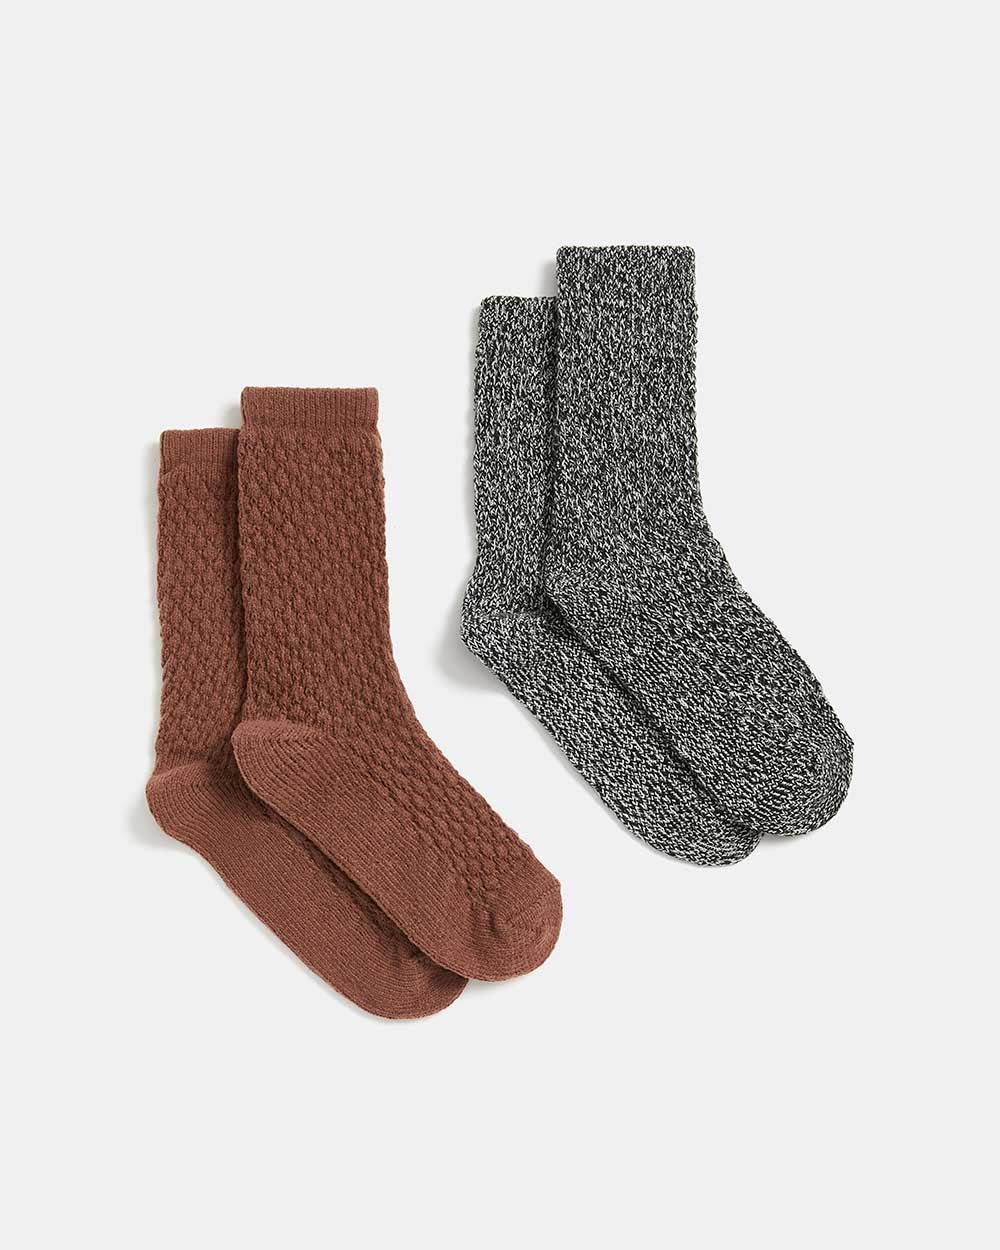 Textured Knit Socks - Two Pairs